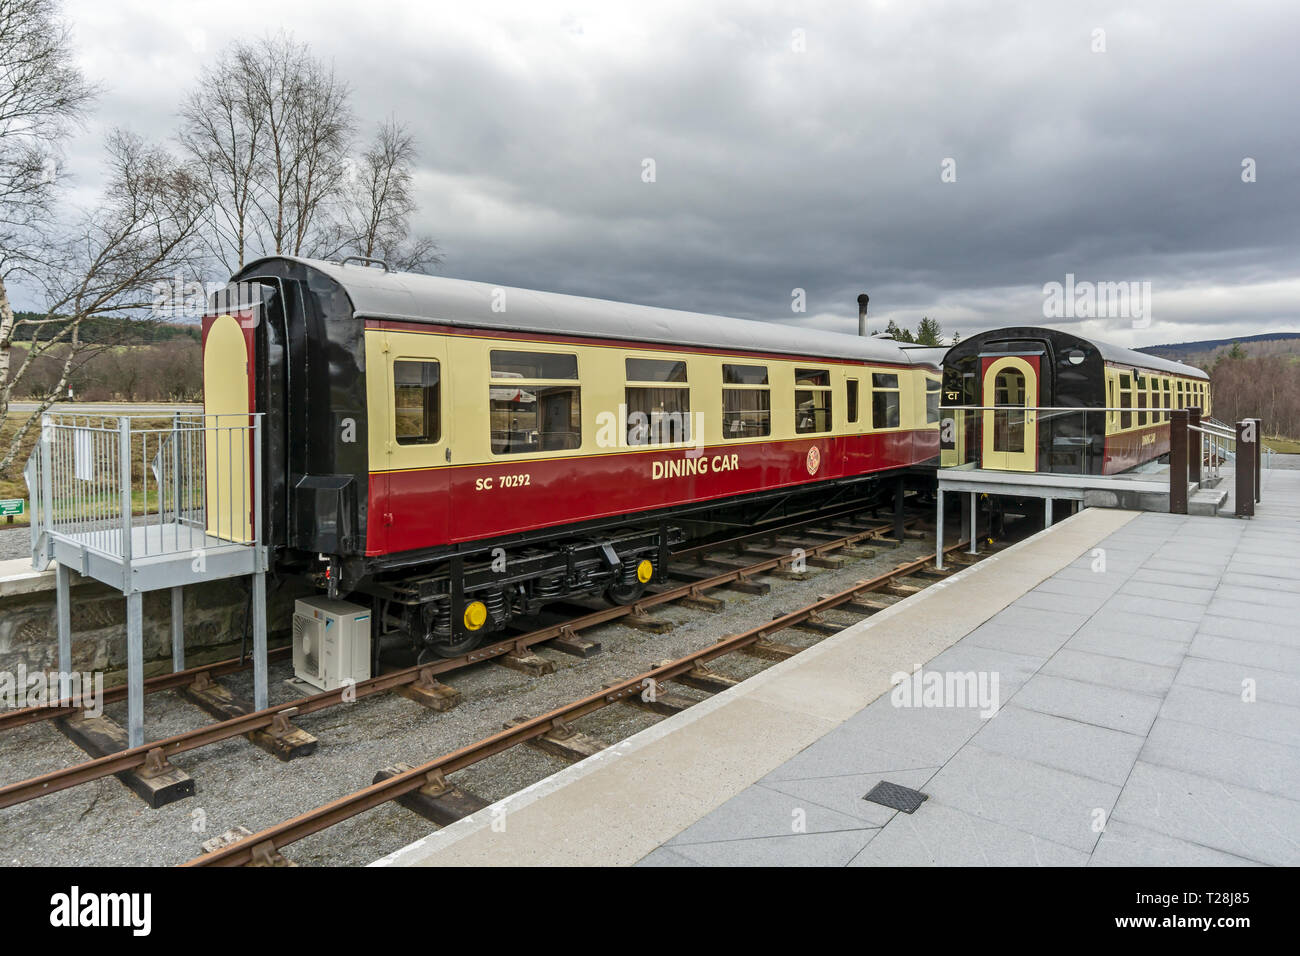 railway-coaches-converted-to-restaurant-at-grantown-east-highland-heritage-and-cultural-centre-in-grantown-on-spey-highland-scotland-uk-T28J85.jpg